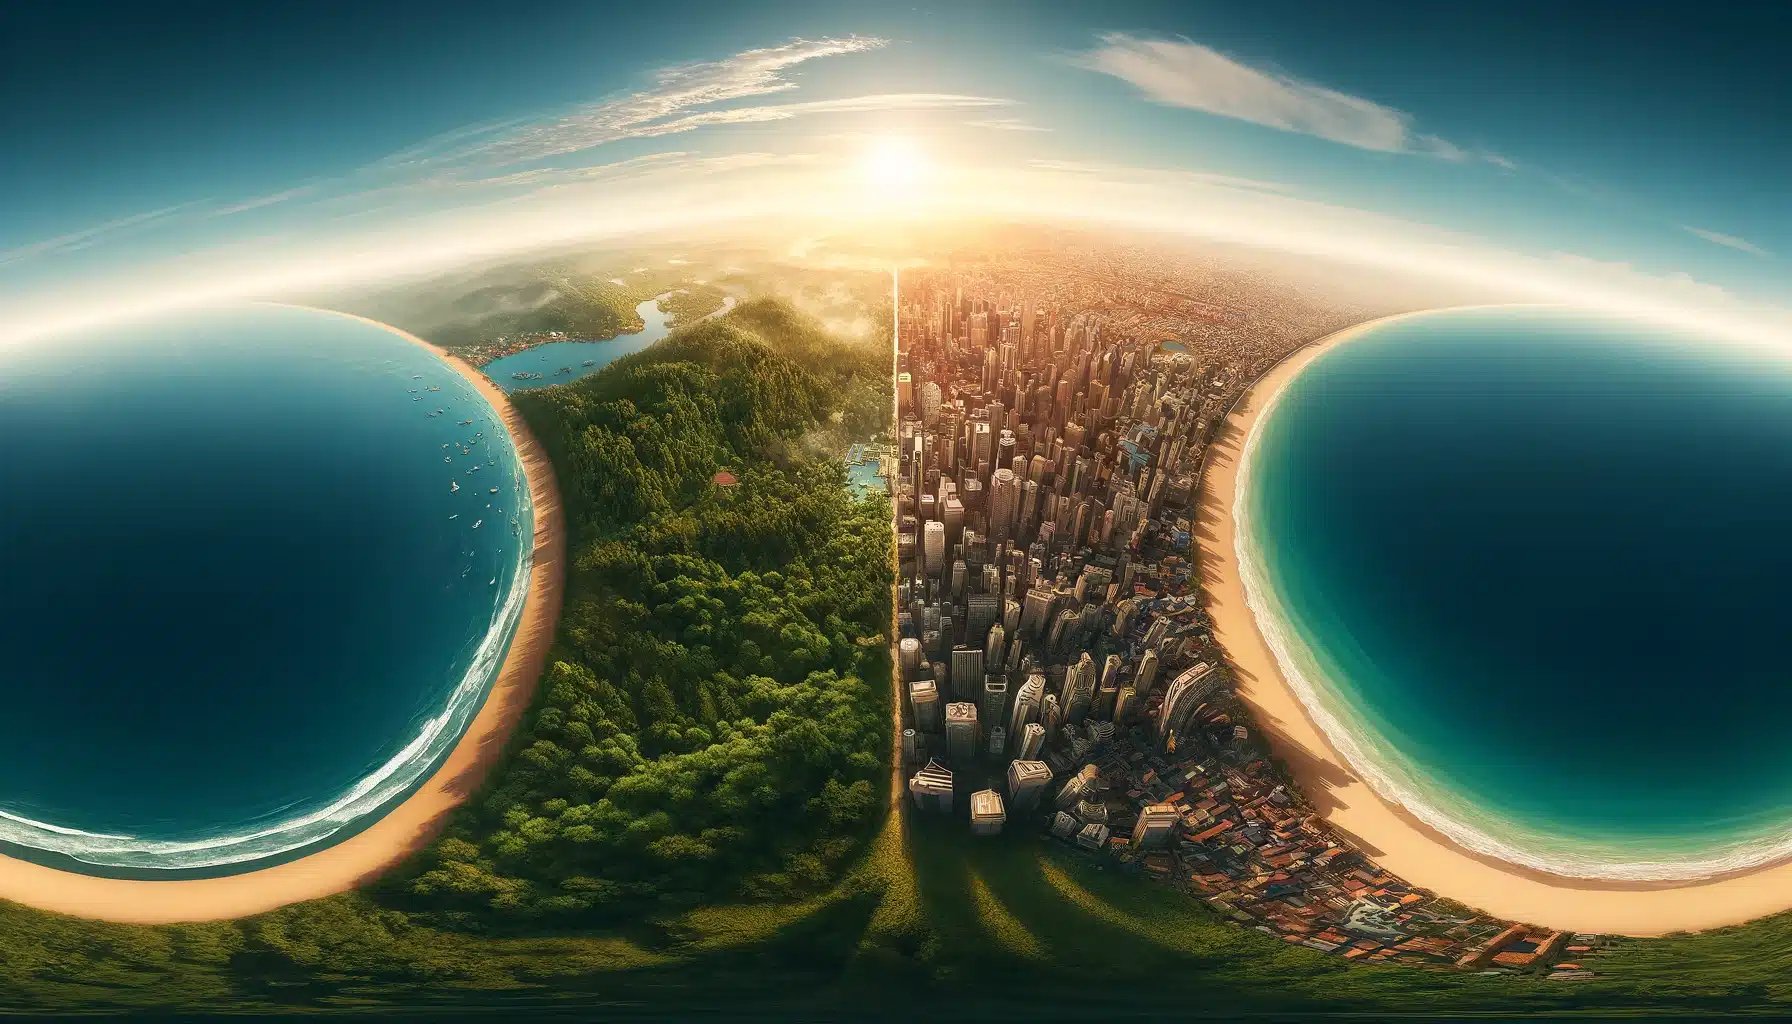 Cycloidal- panoramic view transitioning from a forest, through a cityscape, to a beach, illustrating the comprehensive perspective of cycloidal- Microfilm.